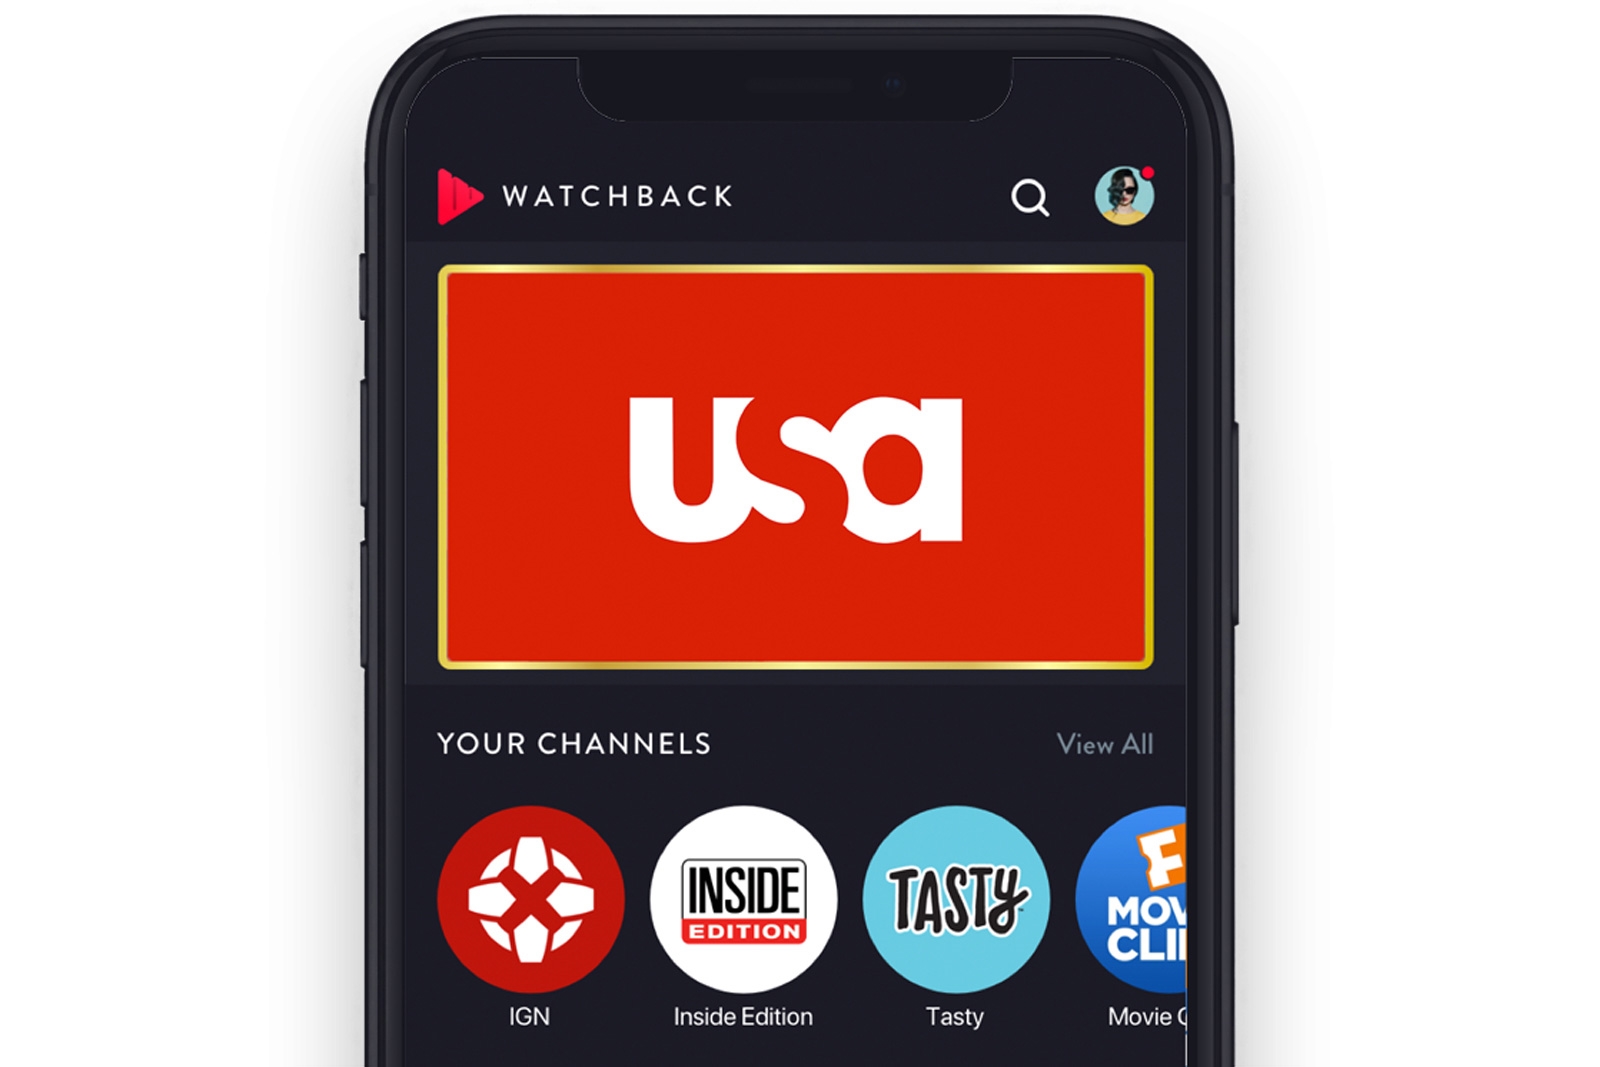 NBC's WatchBack video app rewards you for sharing viewing habits | DeviceDaily.com